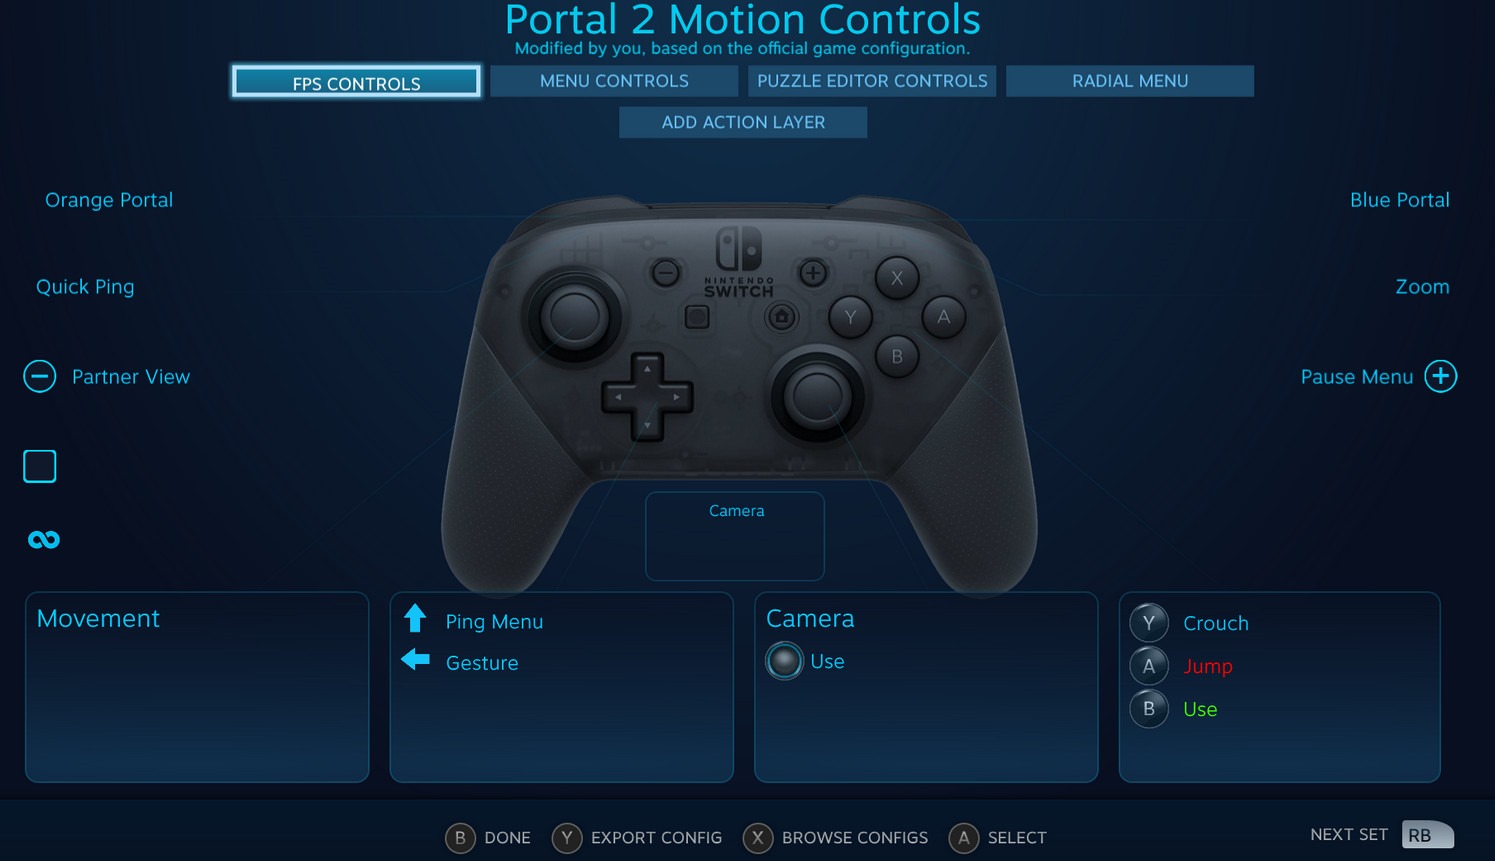 Steam adds support for Nintendo Switch Online classic controllers